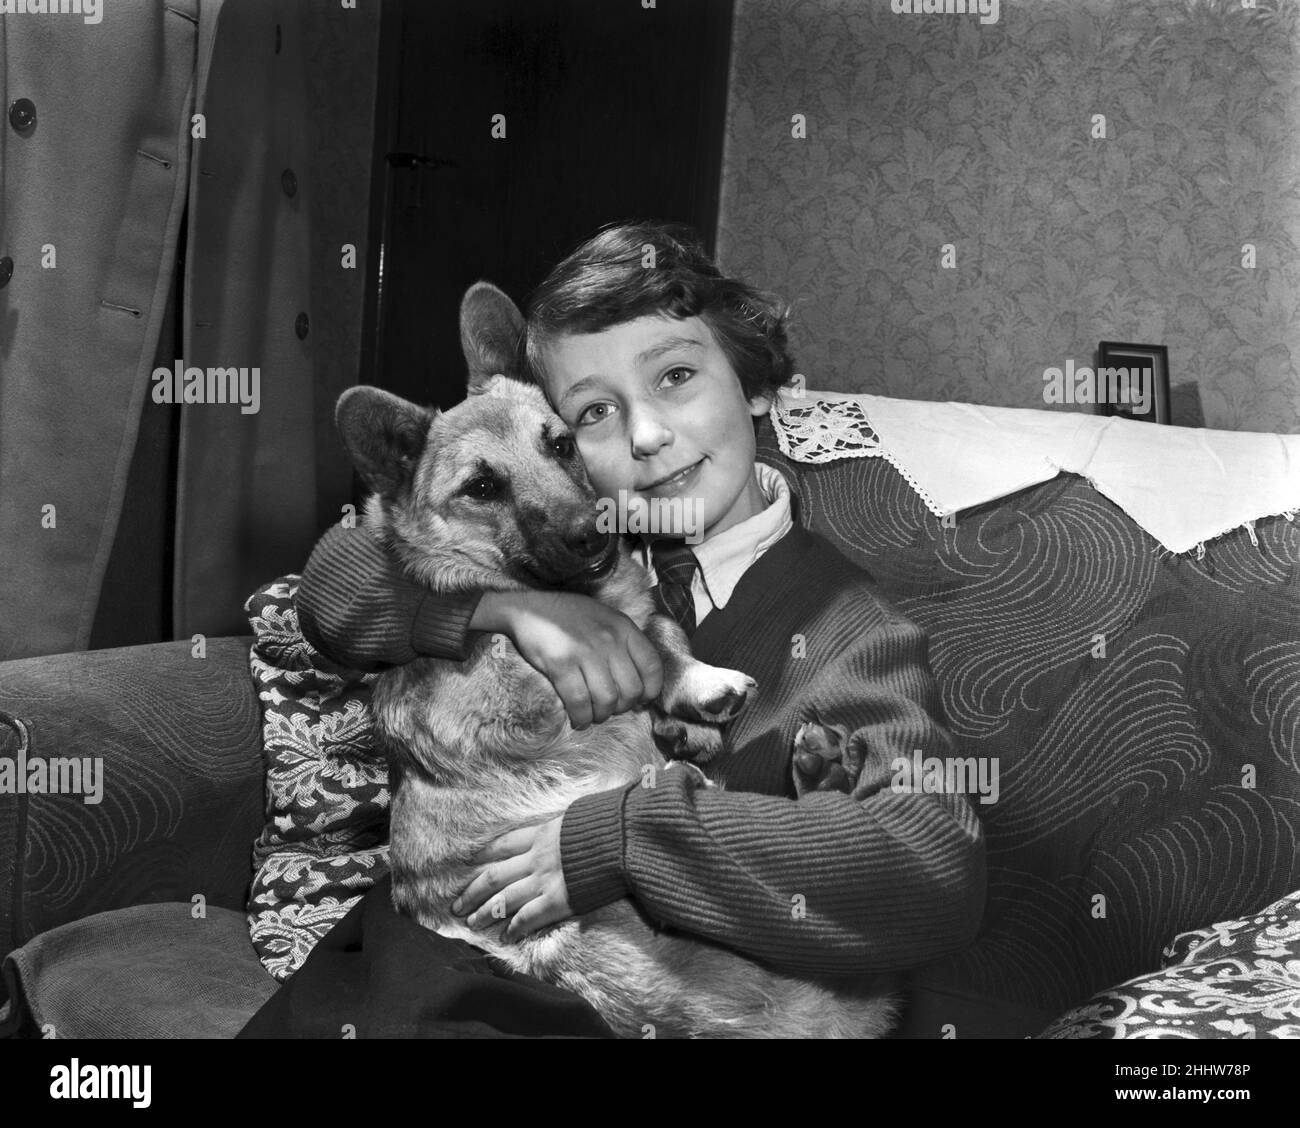 Elaine Cave, aged 9, with Mickey her pet Corgi, at home in Coalville, Leicestershire. Elaine has been absent from school for nine days since her pet Corgi ran away. For three days she walked the streets looking for him, then she became ill and was in bed for a week. Mickey was then brought home by a man who found him wandering two miles away. Within an hour Elaine was up. 25th March 1955. Stock Photo